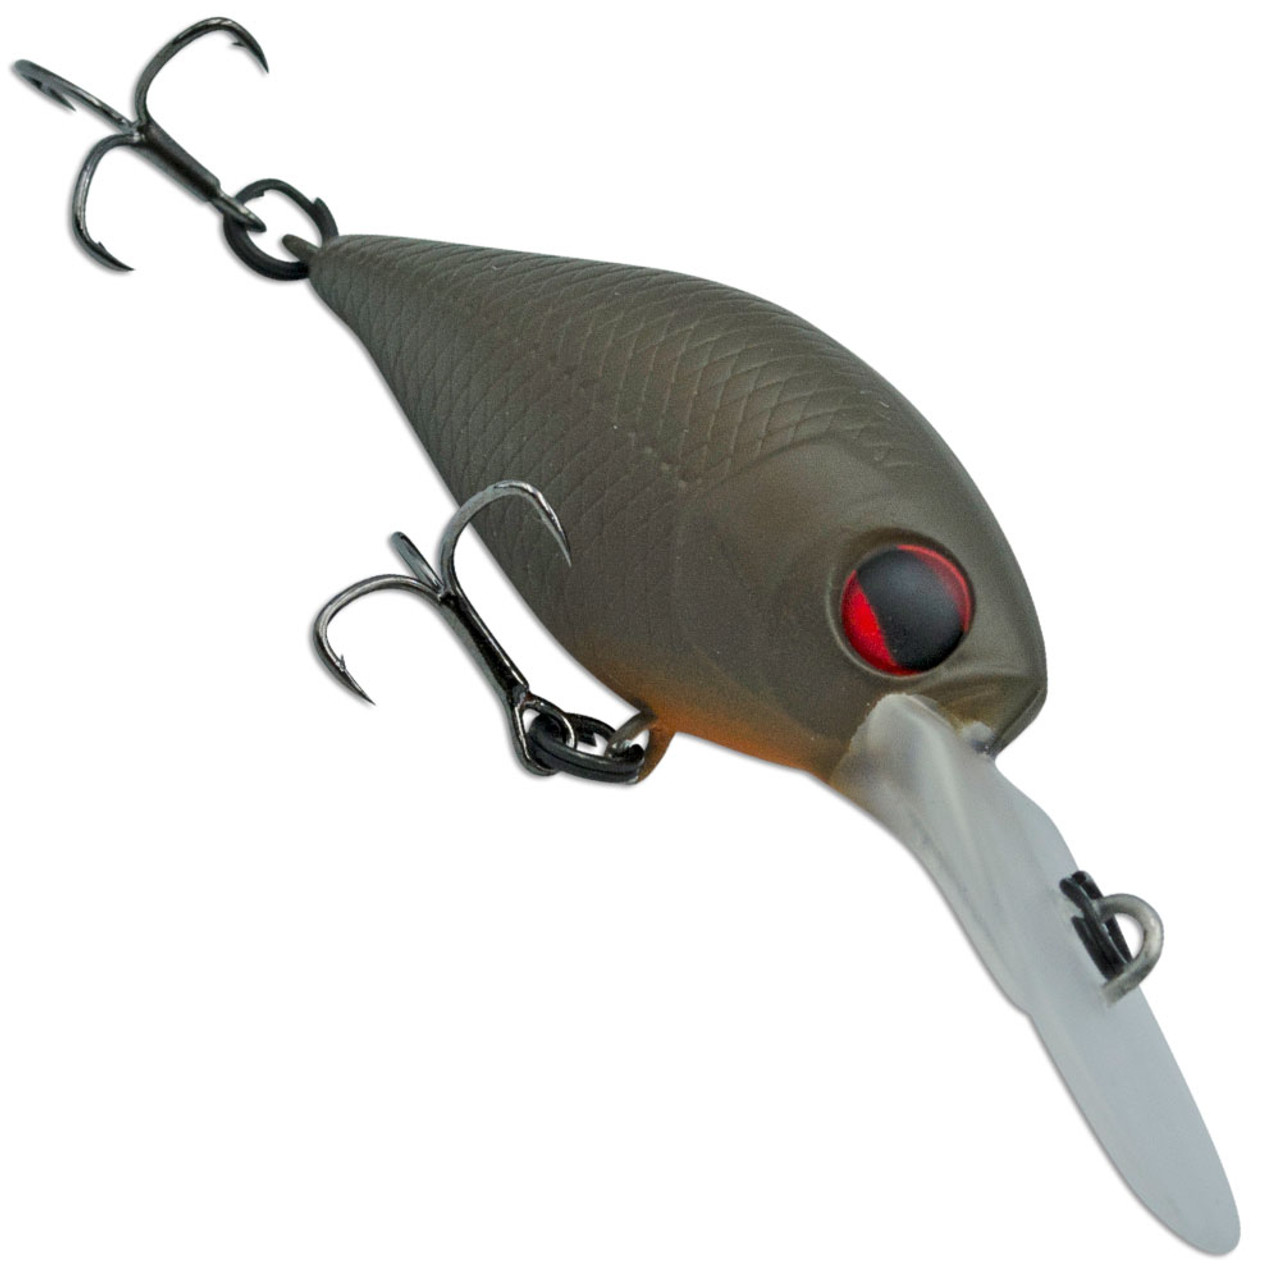 Pro Lure Crank Bream Fishing Lures S36 or D36 For Sale